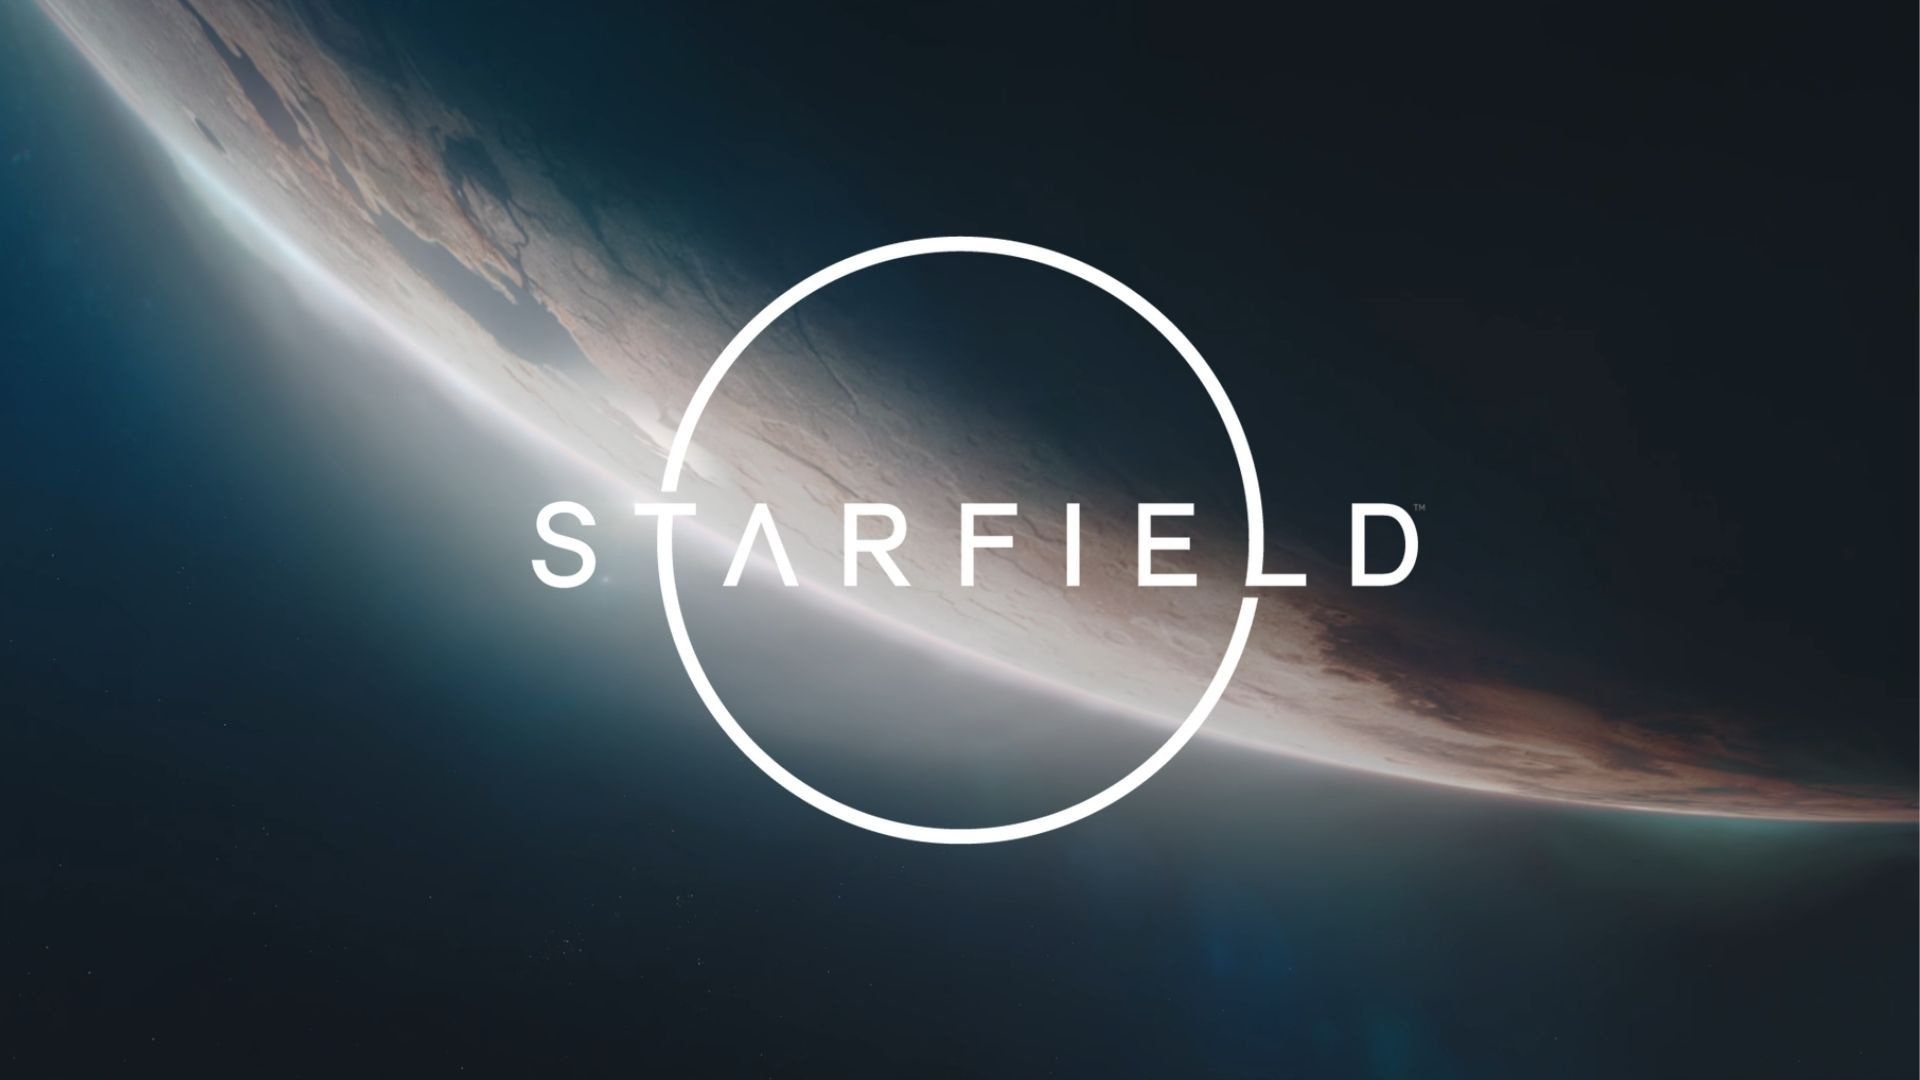 Are These Image Our First Look At Bethesda's Starfield?